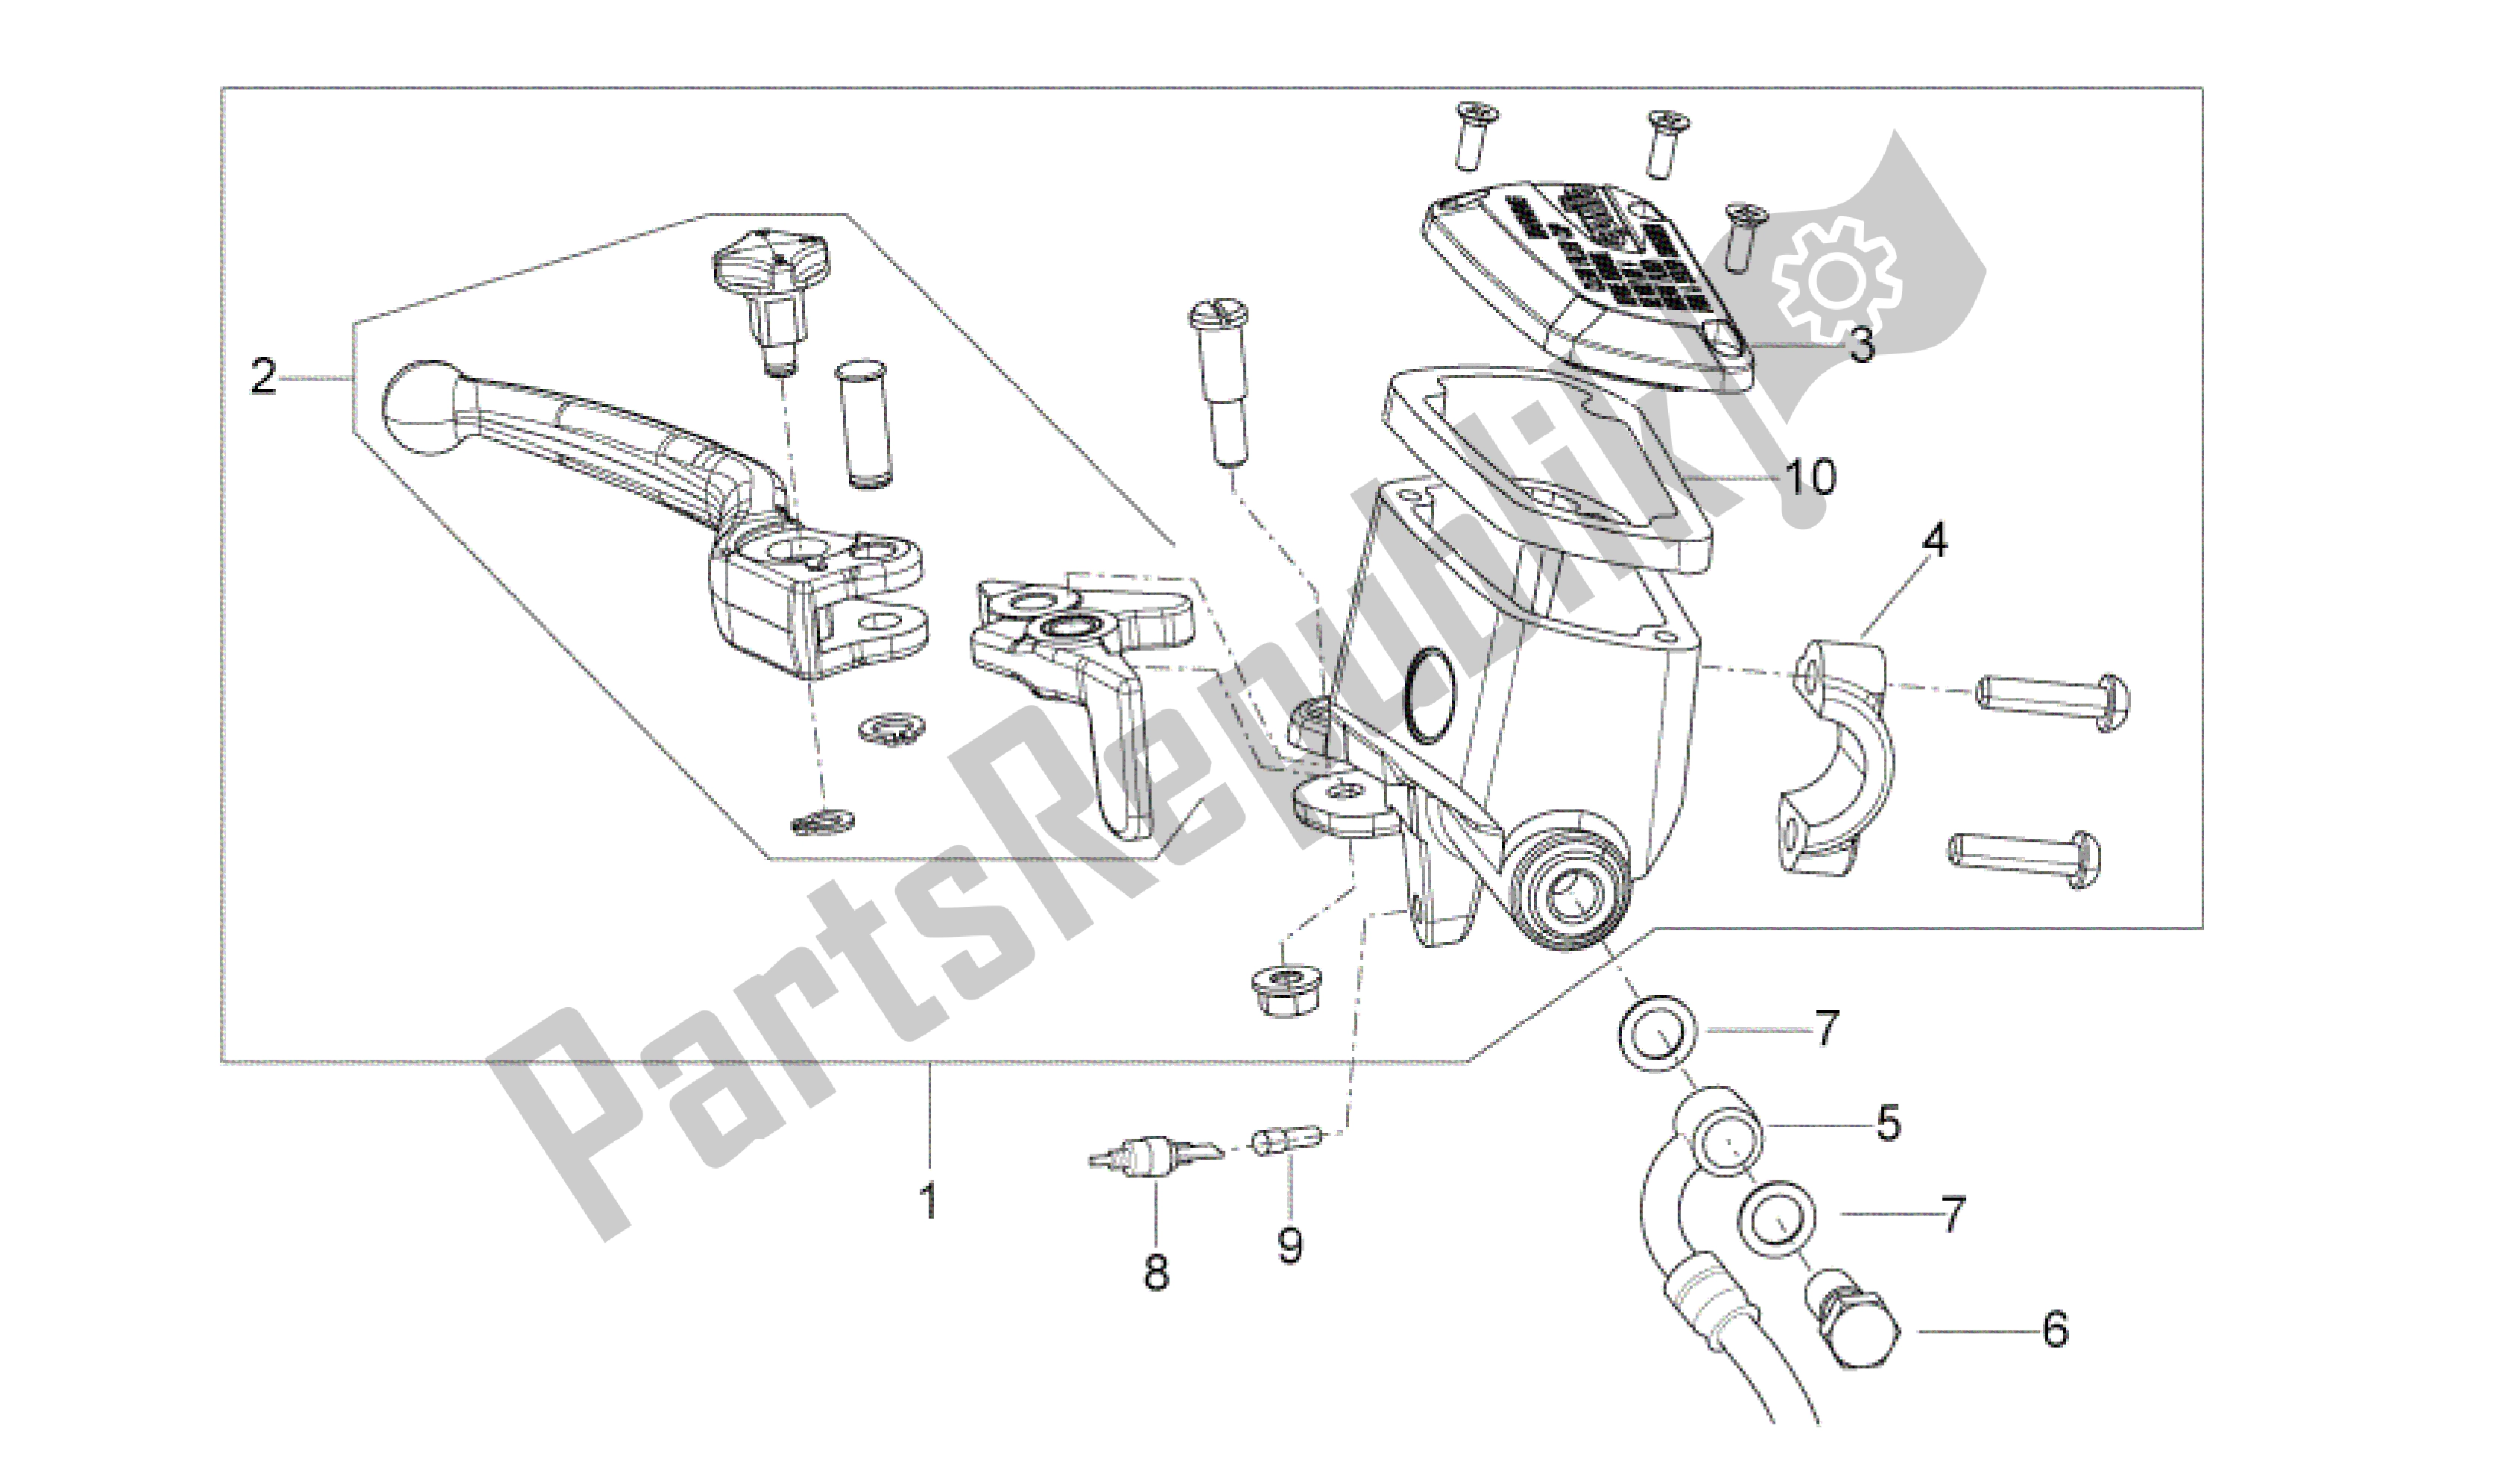 All parts for the Front Master Cilinder of the Aprilia Shiver 750 2007 - 2009